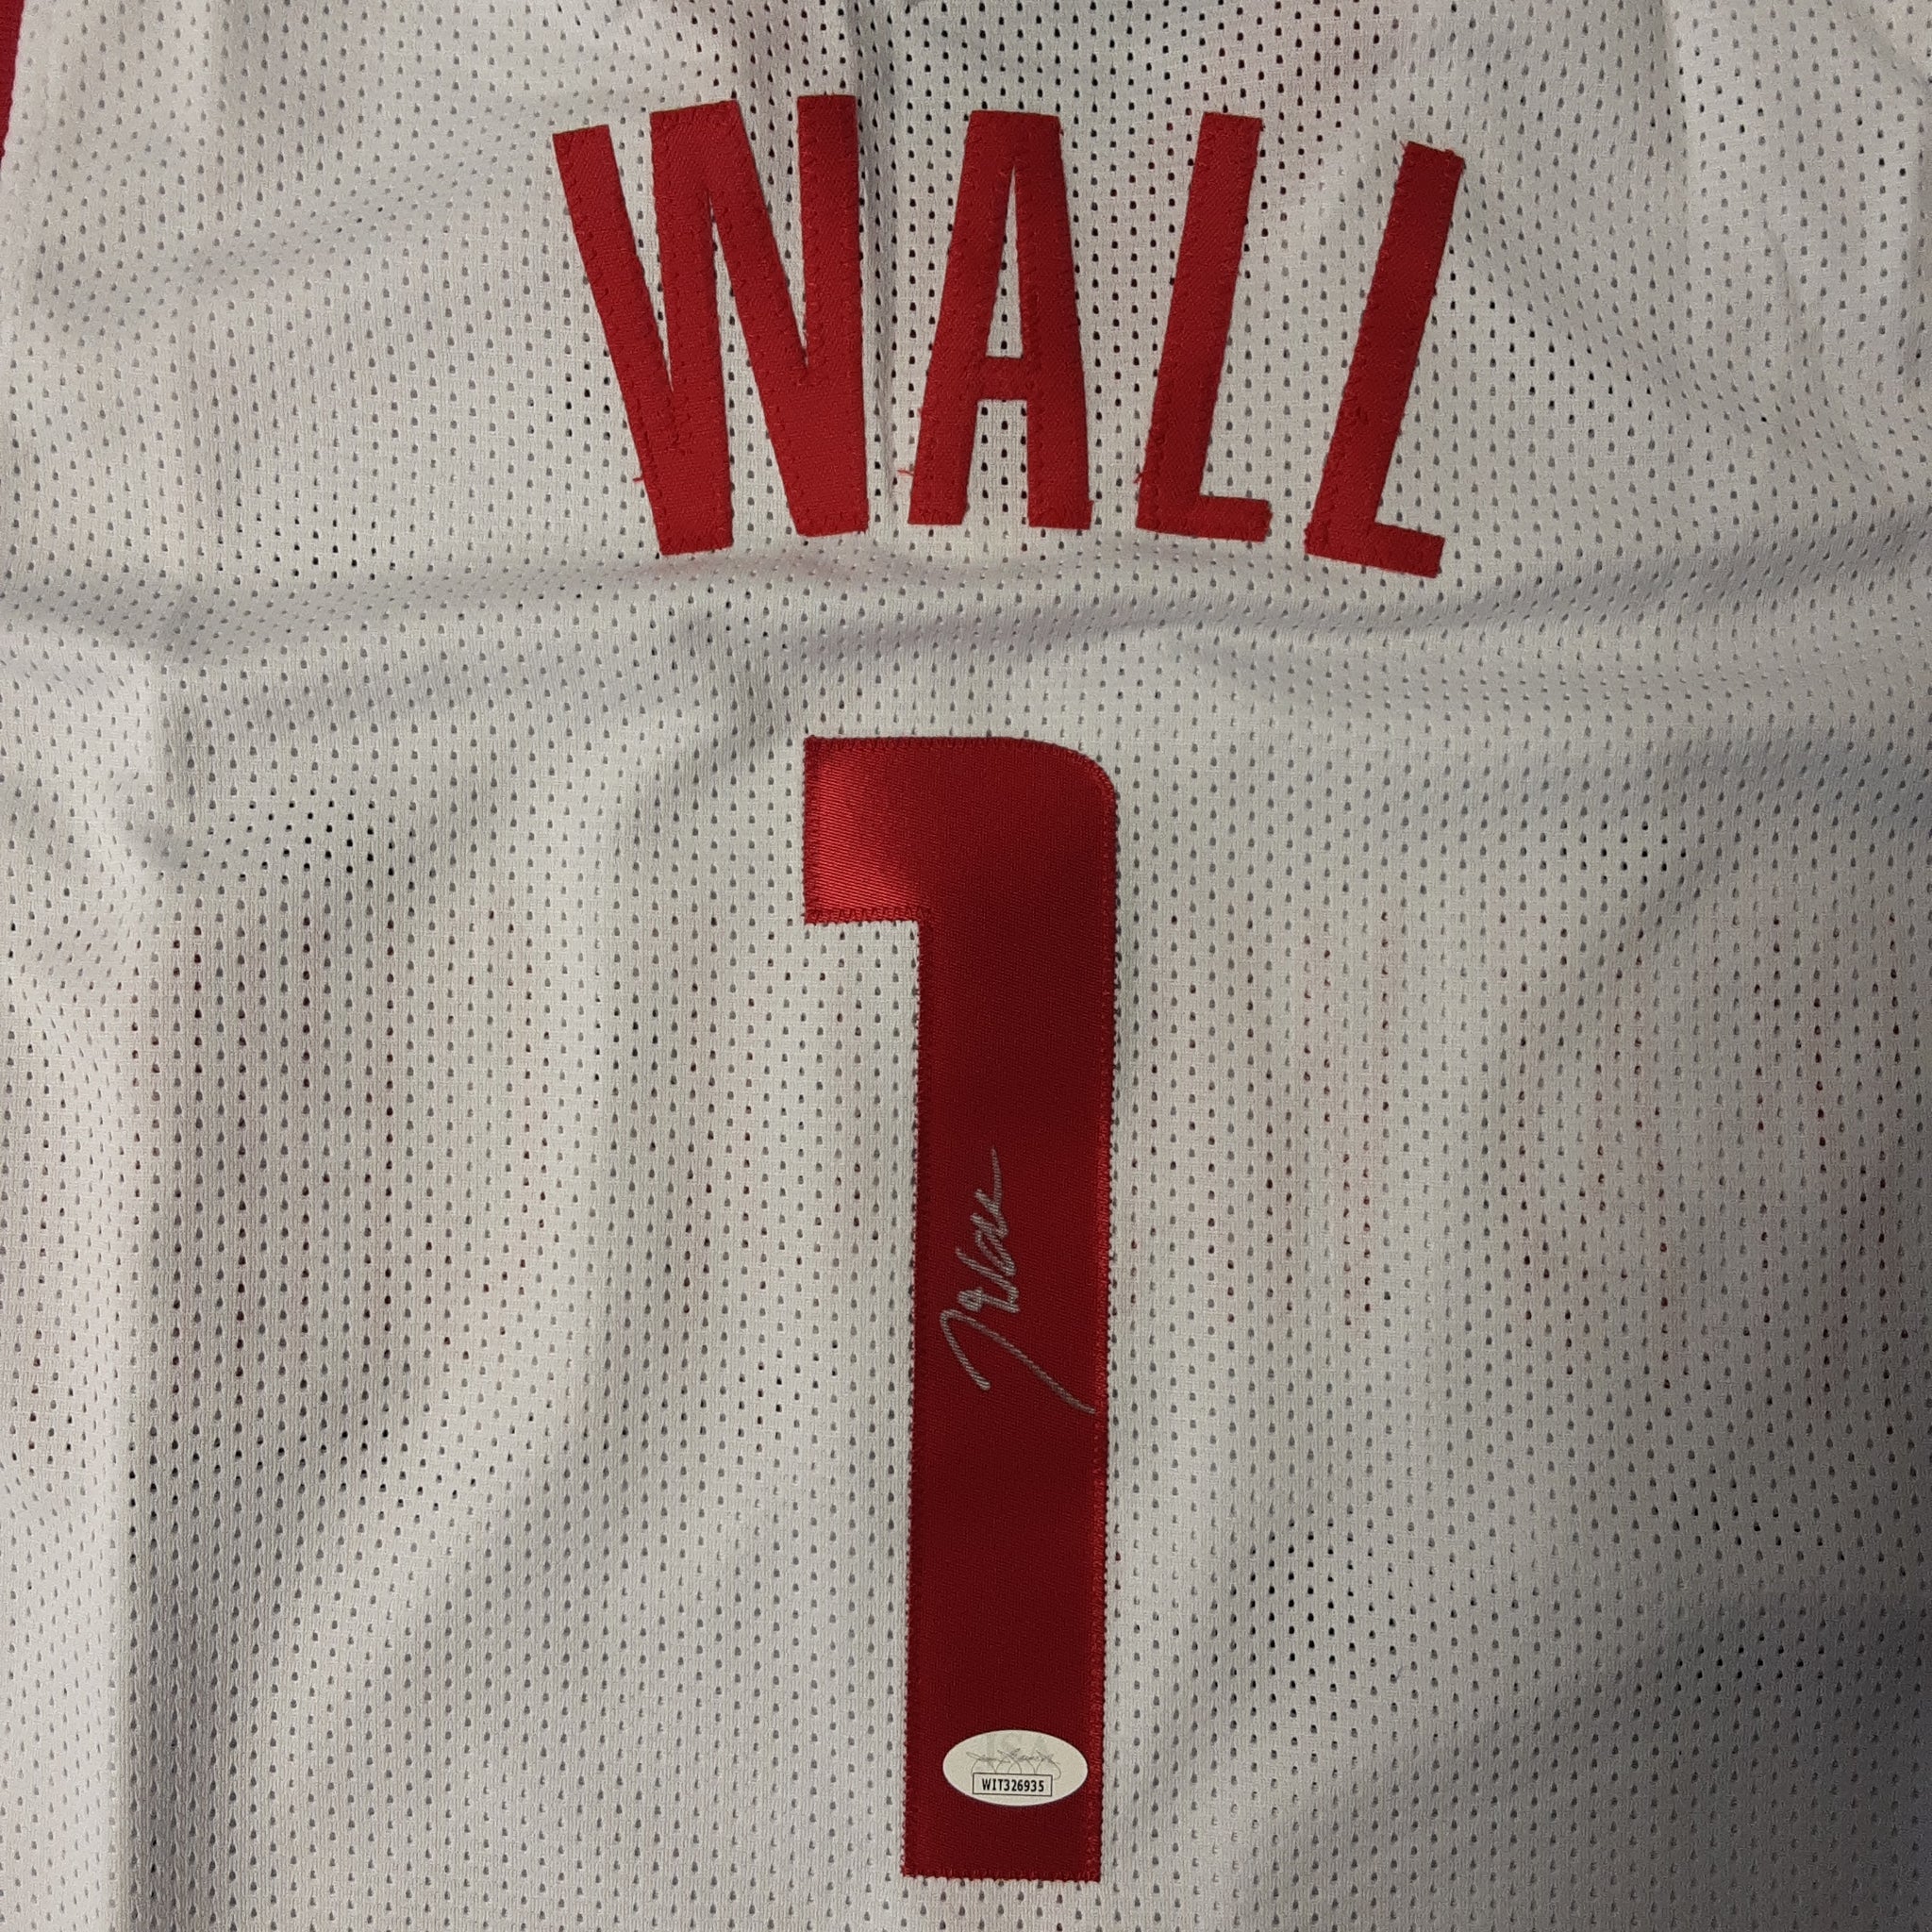 John Wall Authentic Signed Pro Style Jersey Autographed JSA